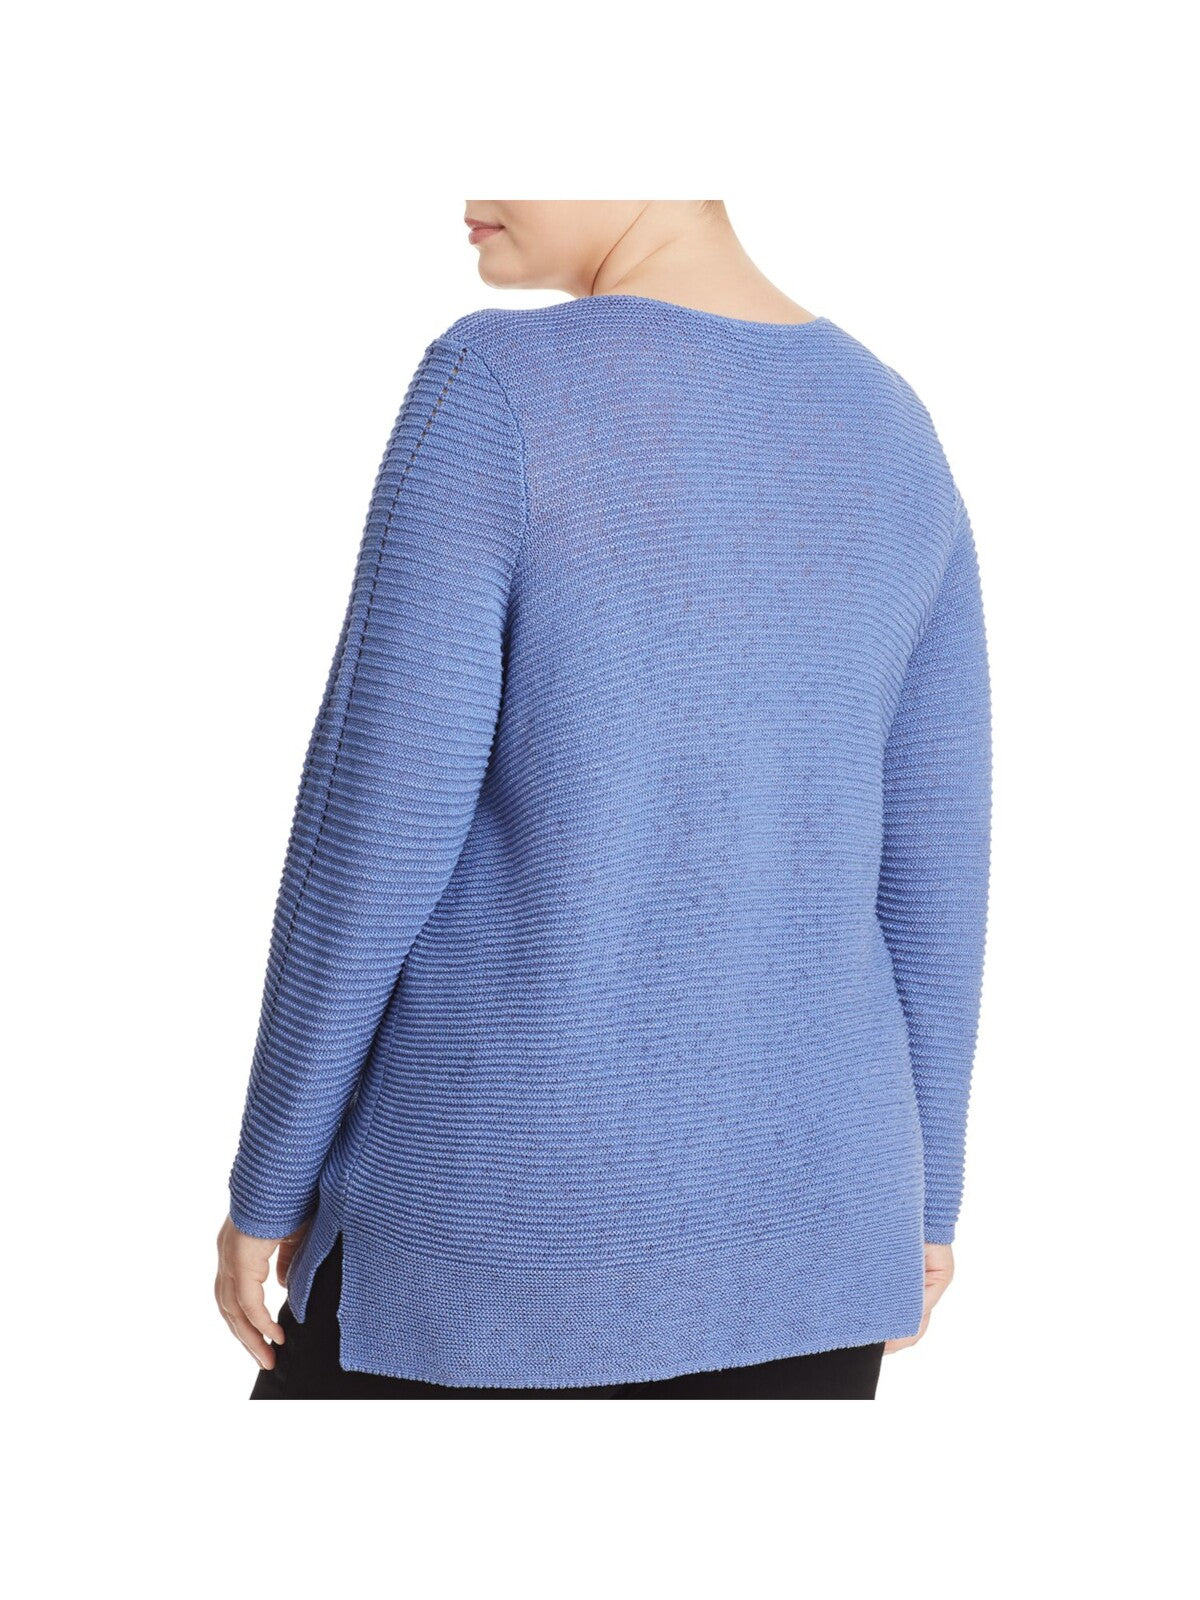 NIC+ZOE Womens Light Blue Knit Slitted Ribbed Asymmetrical Faux-wrap Front Long Sleeve Collarless Faux Wrap Sweater Plus 3X